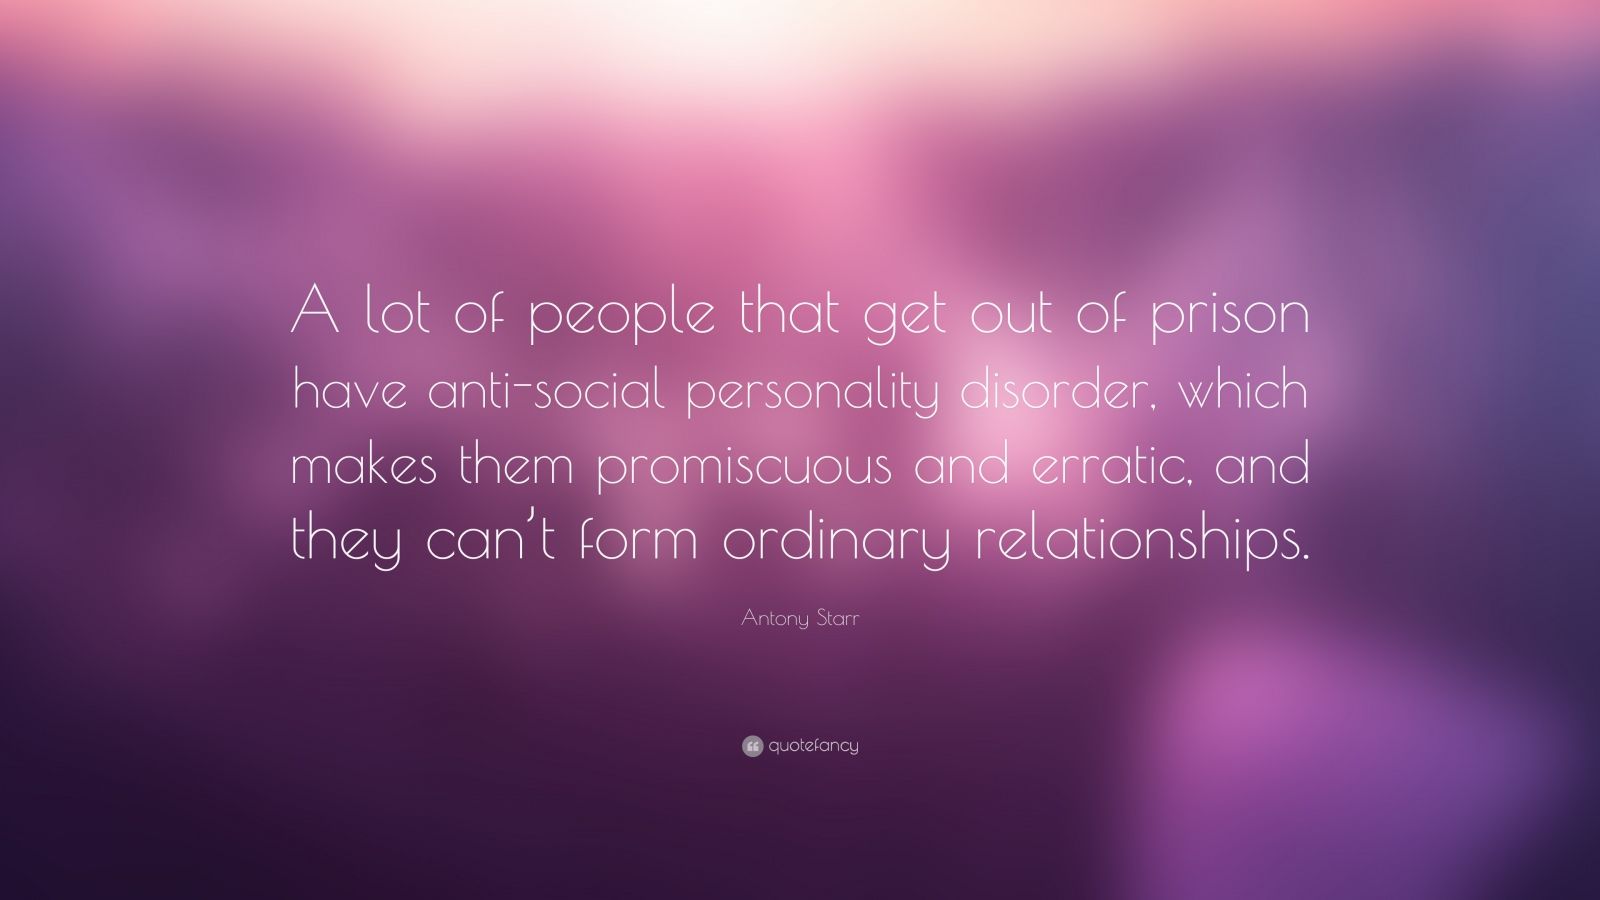 Antony Starr Quote: “A lot of people that get out of prison have anti ...